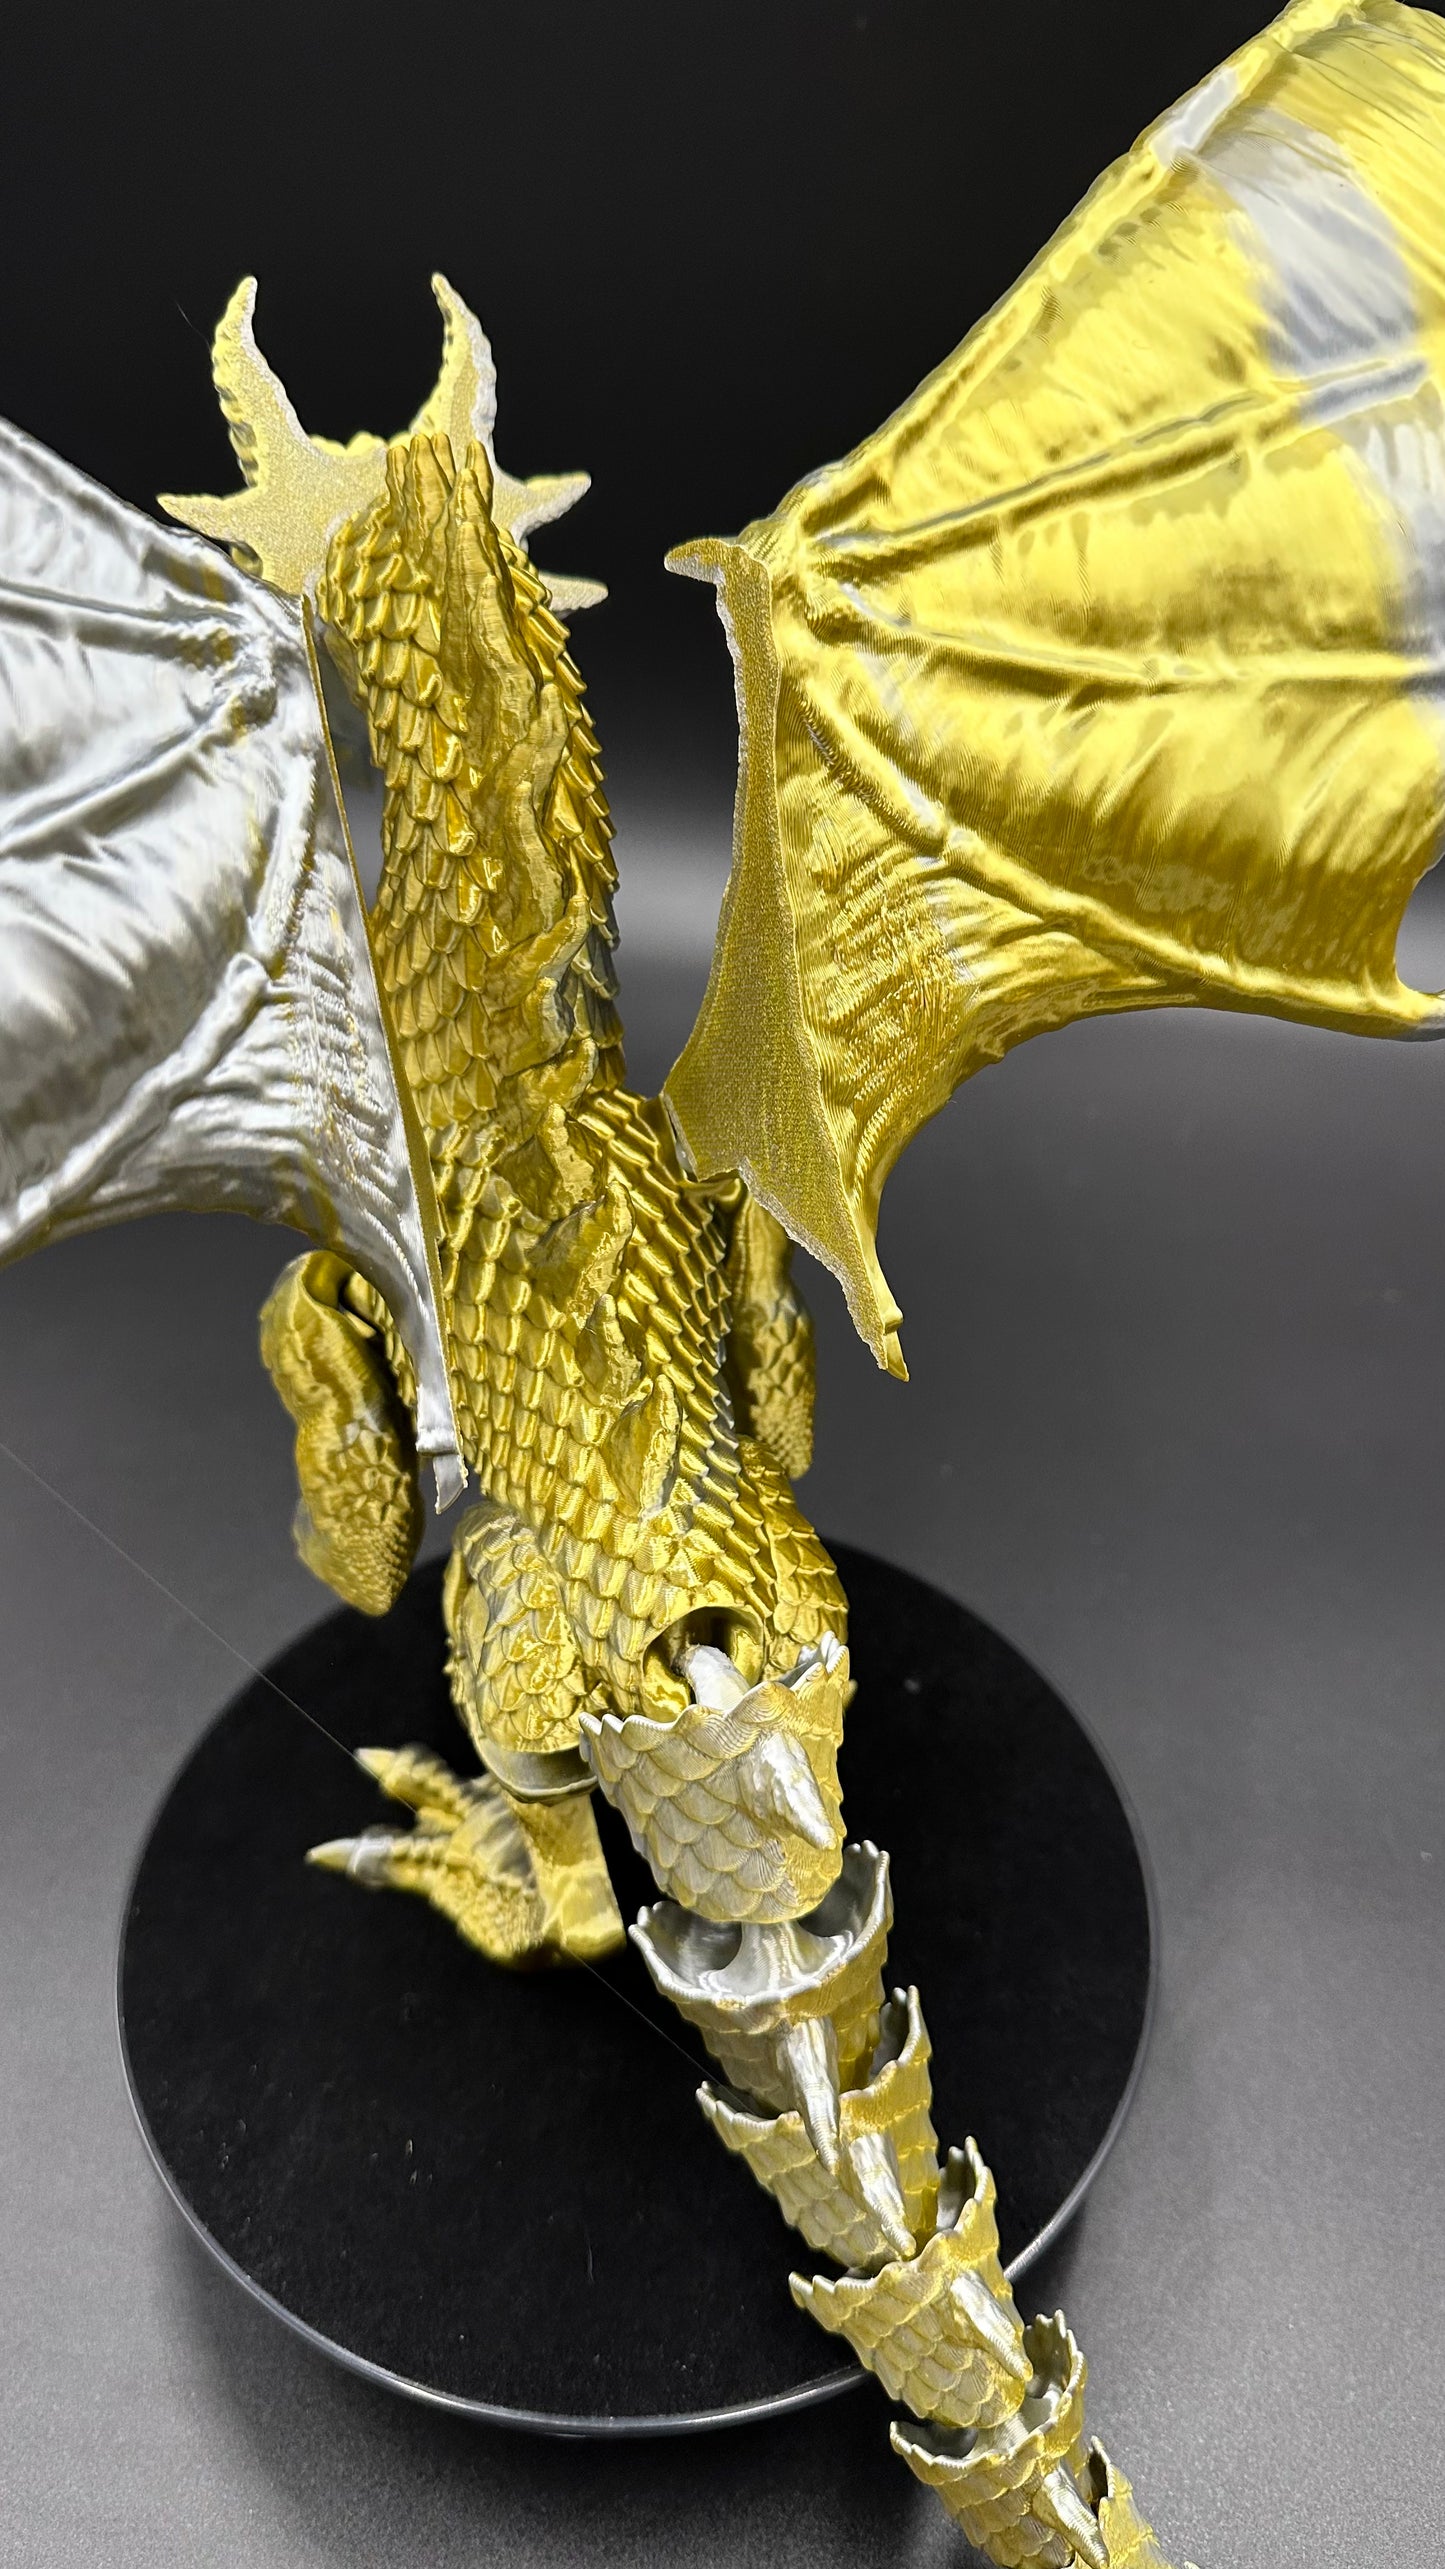 3D Printed Articulating "Epic" Winged Dragon